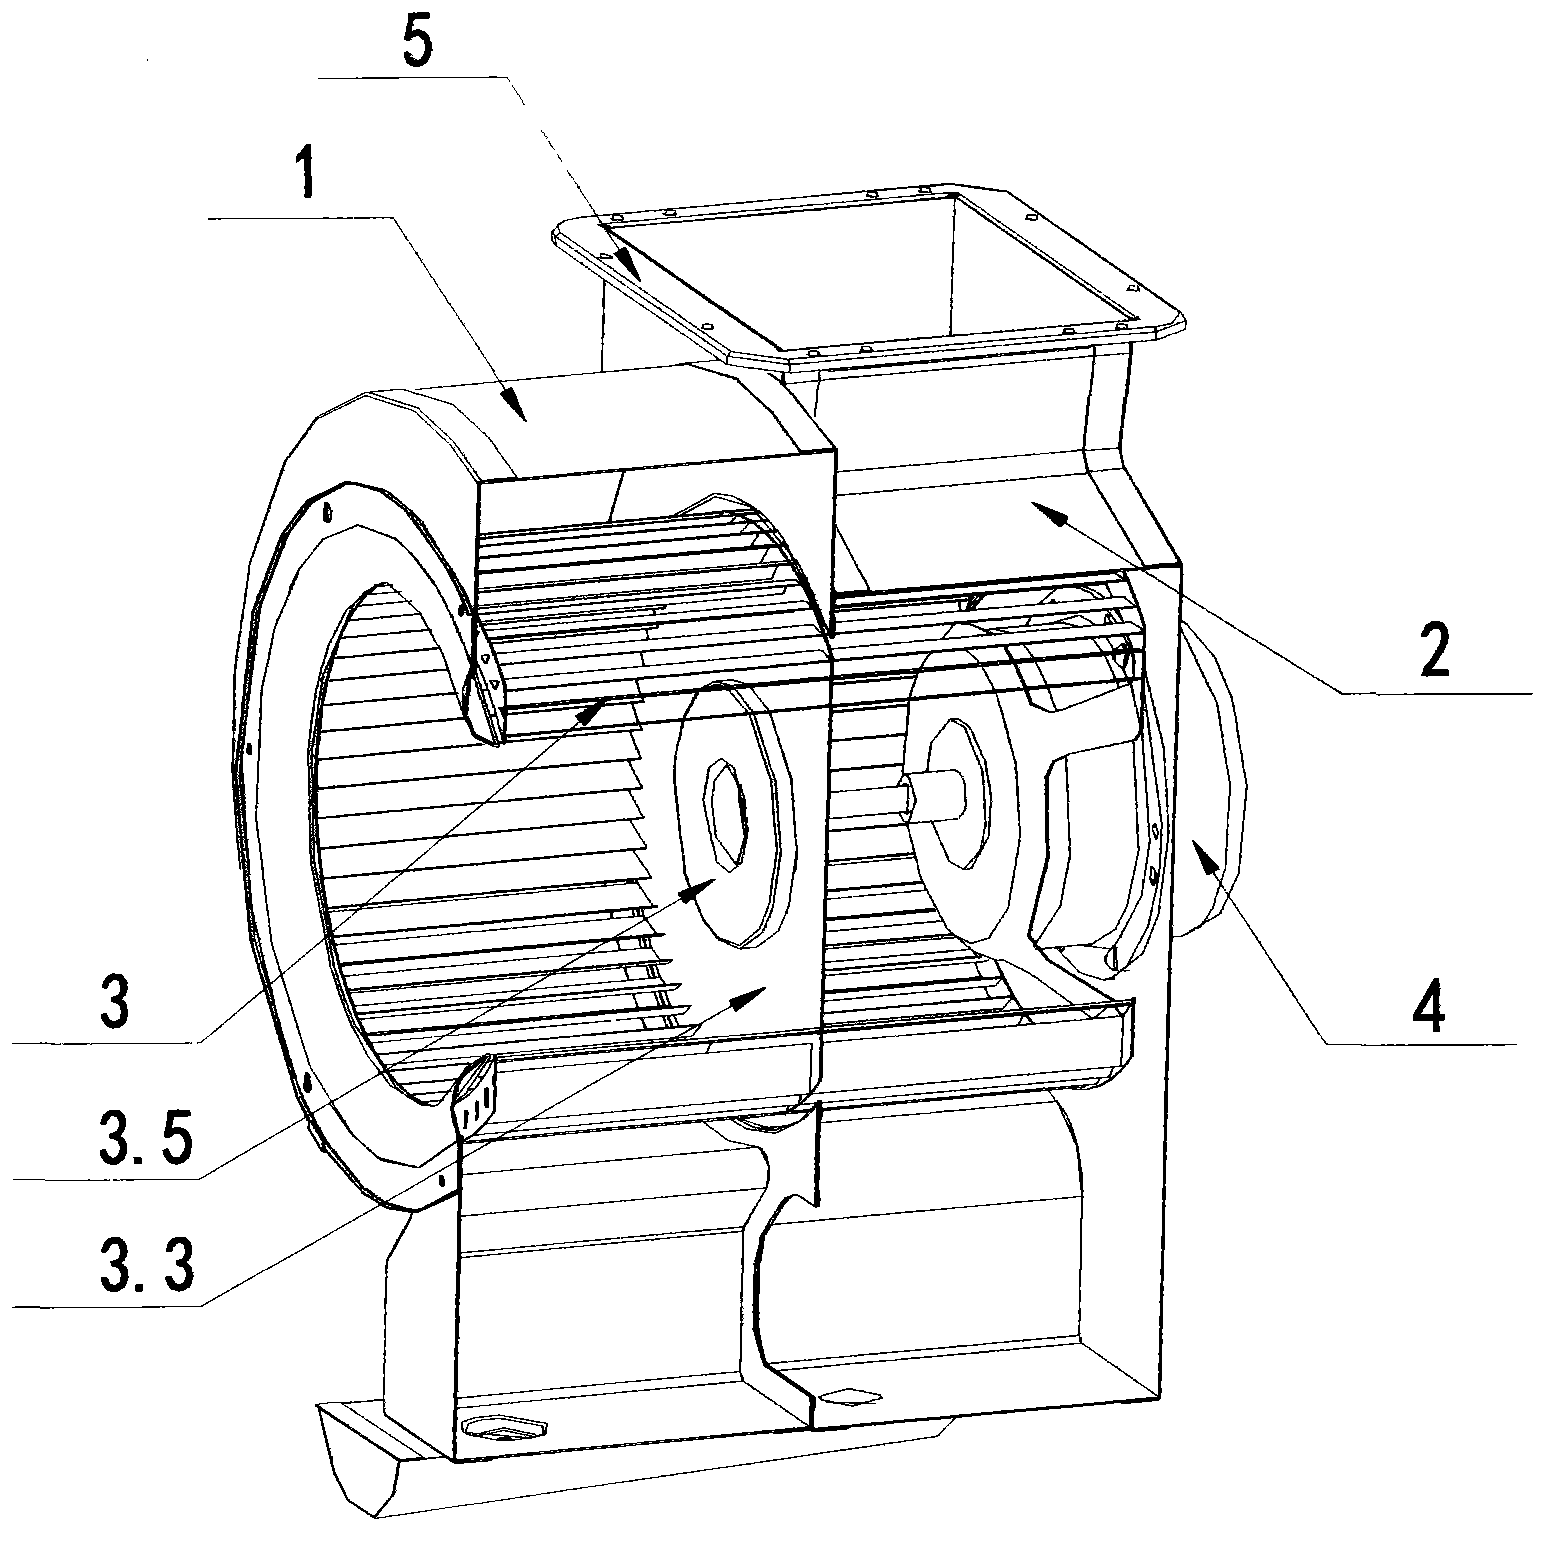 Relay flow fan and extractor hood with same